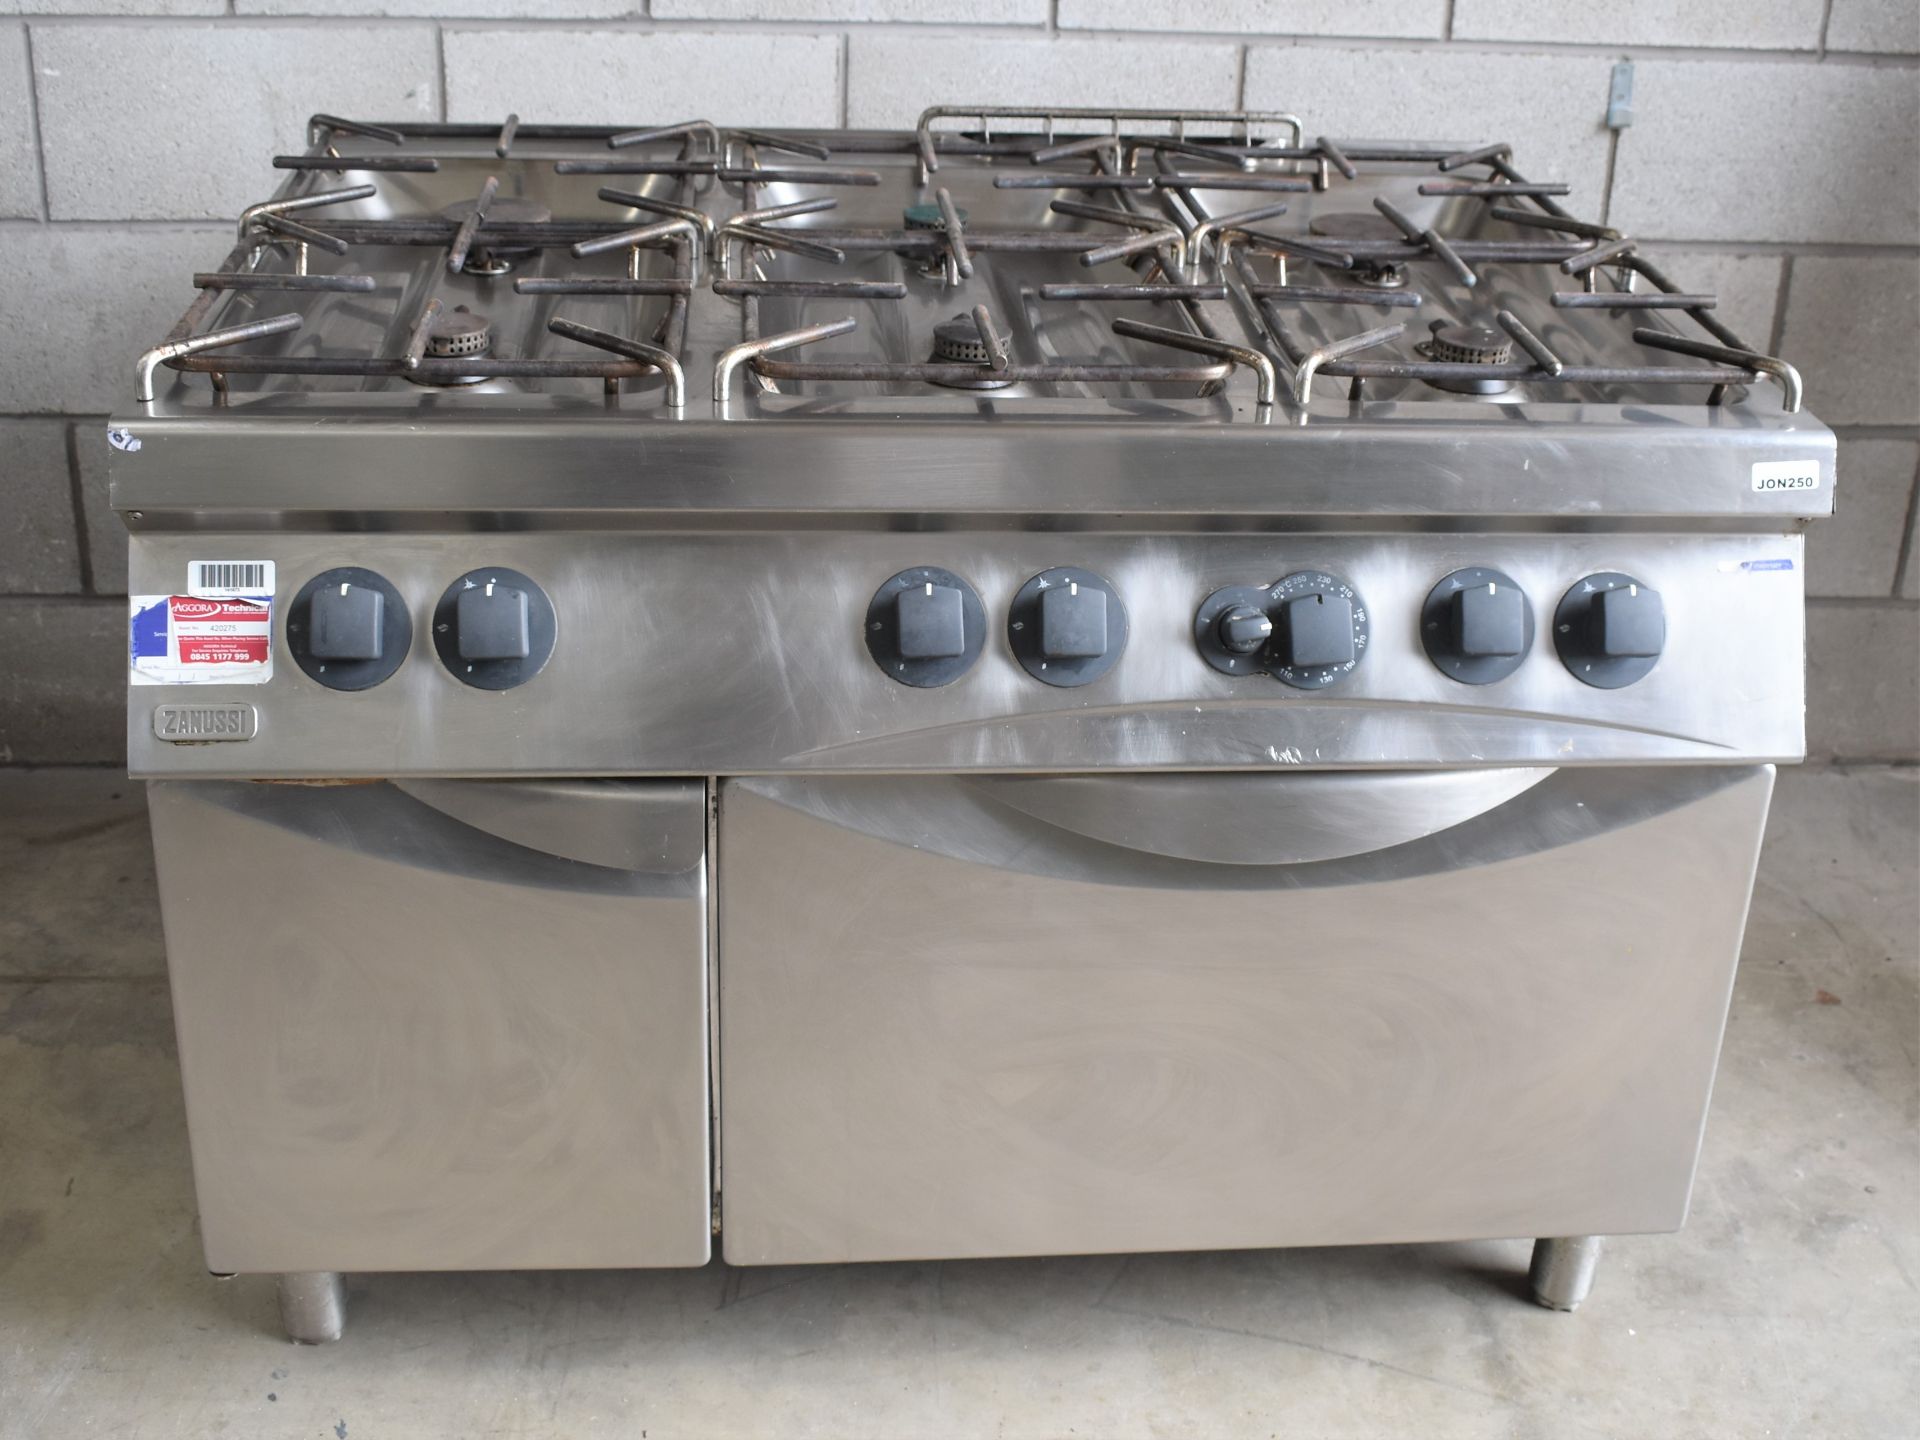 1 x Zanussi 6 Burner Gas Range Cooker with a Stainless Steel Exterior - Image 18 of 18